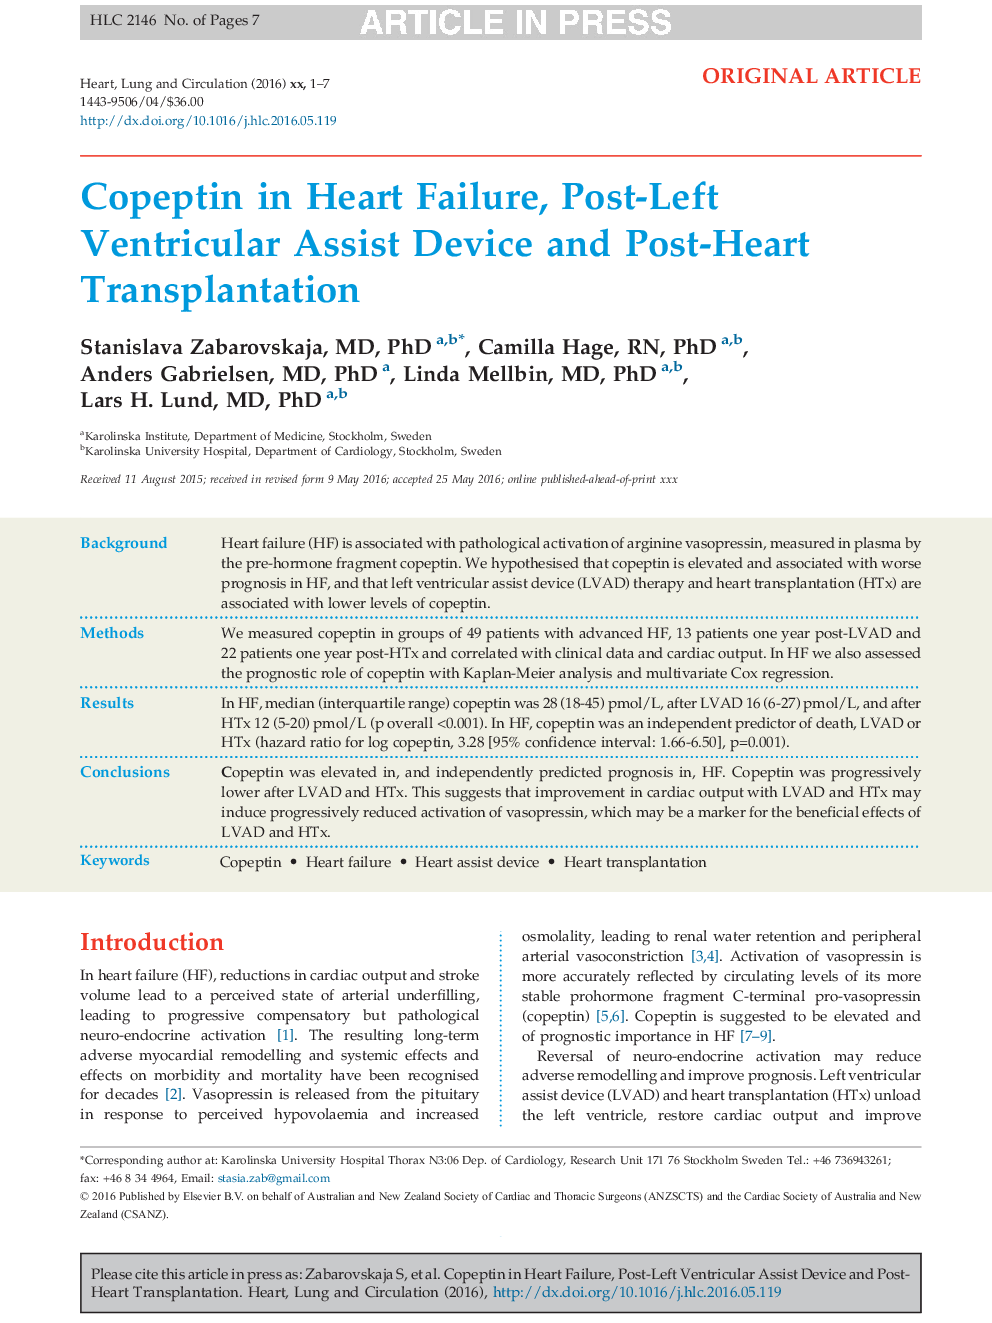 Copeptin in Heart Failure, Post-Left Ventricular Assist Device and Post-Heart Transplantation